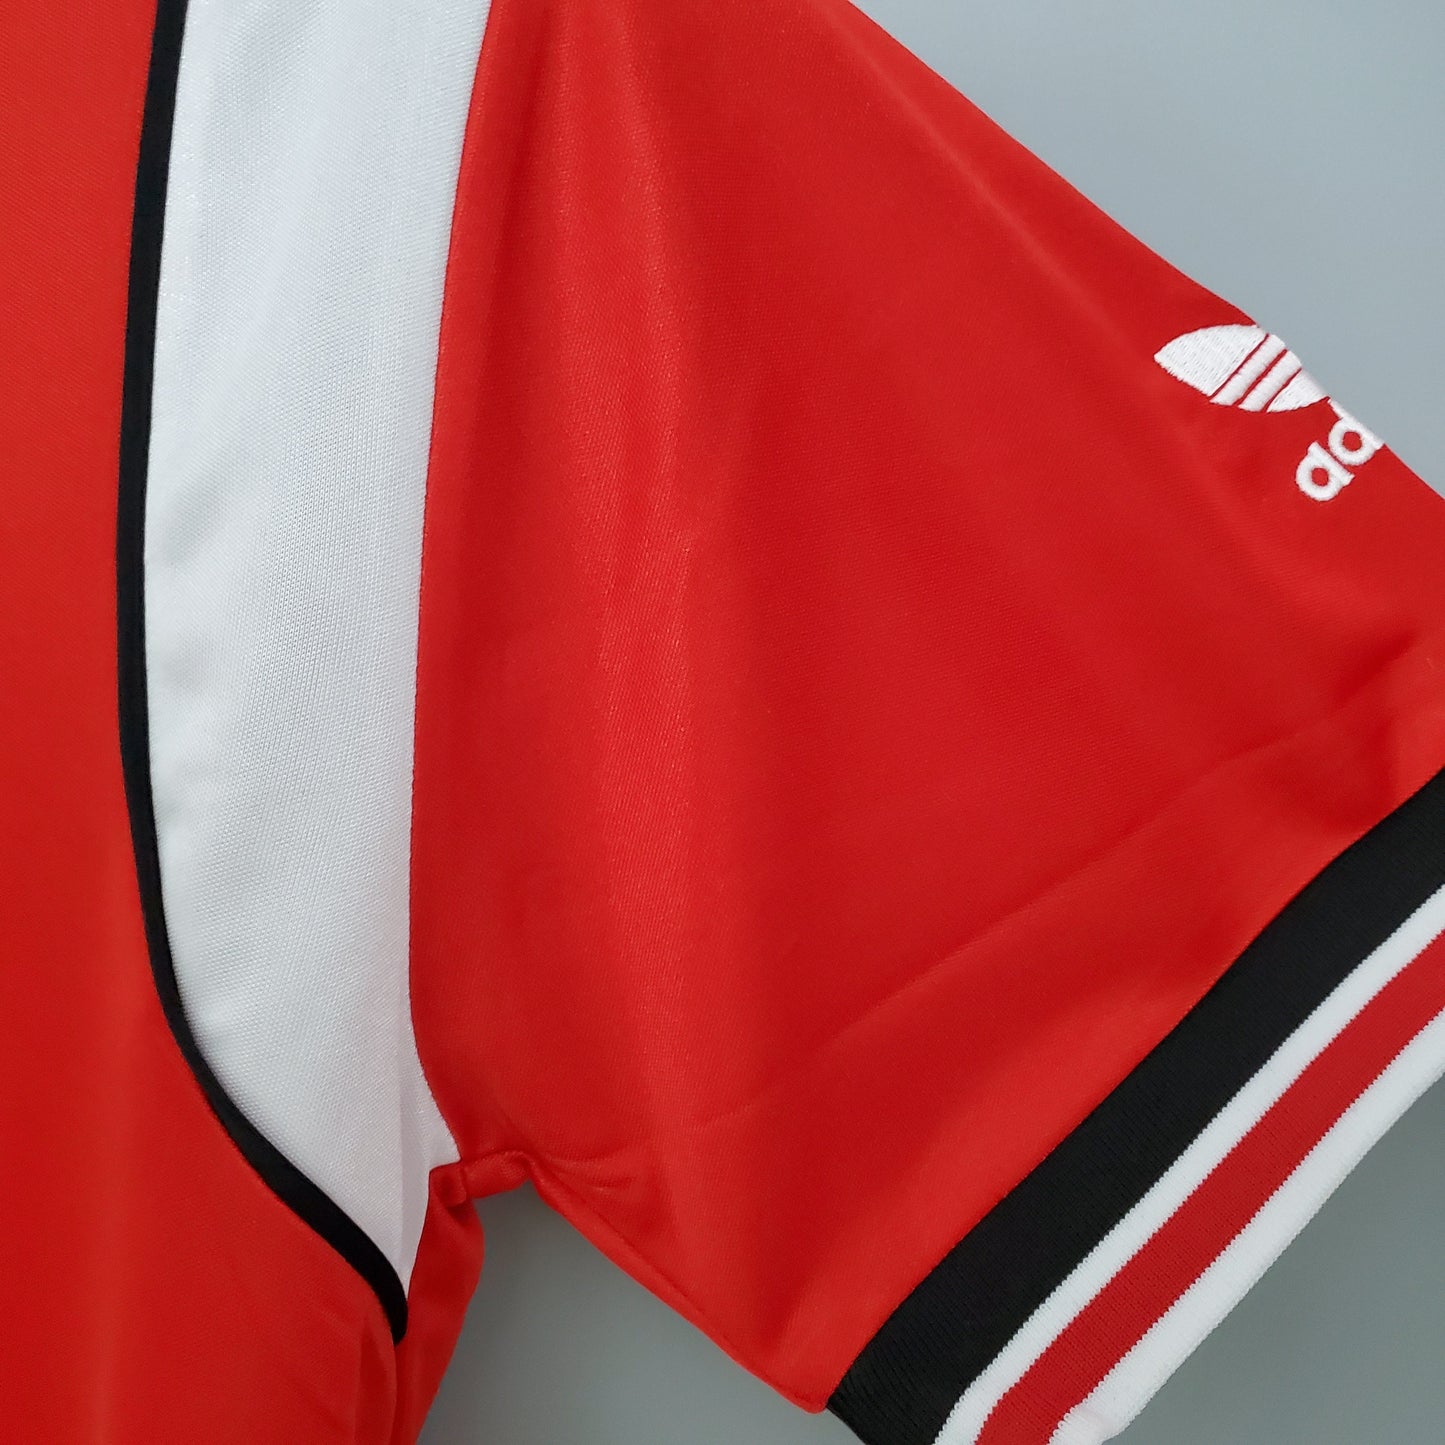 MANCHESTER UNITED 1985 - 1986 HOME JERSEY